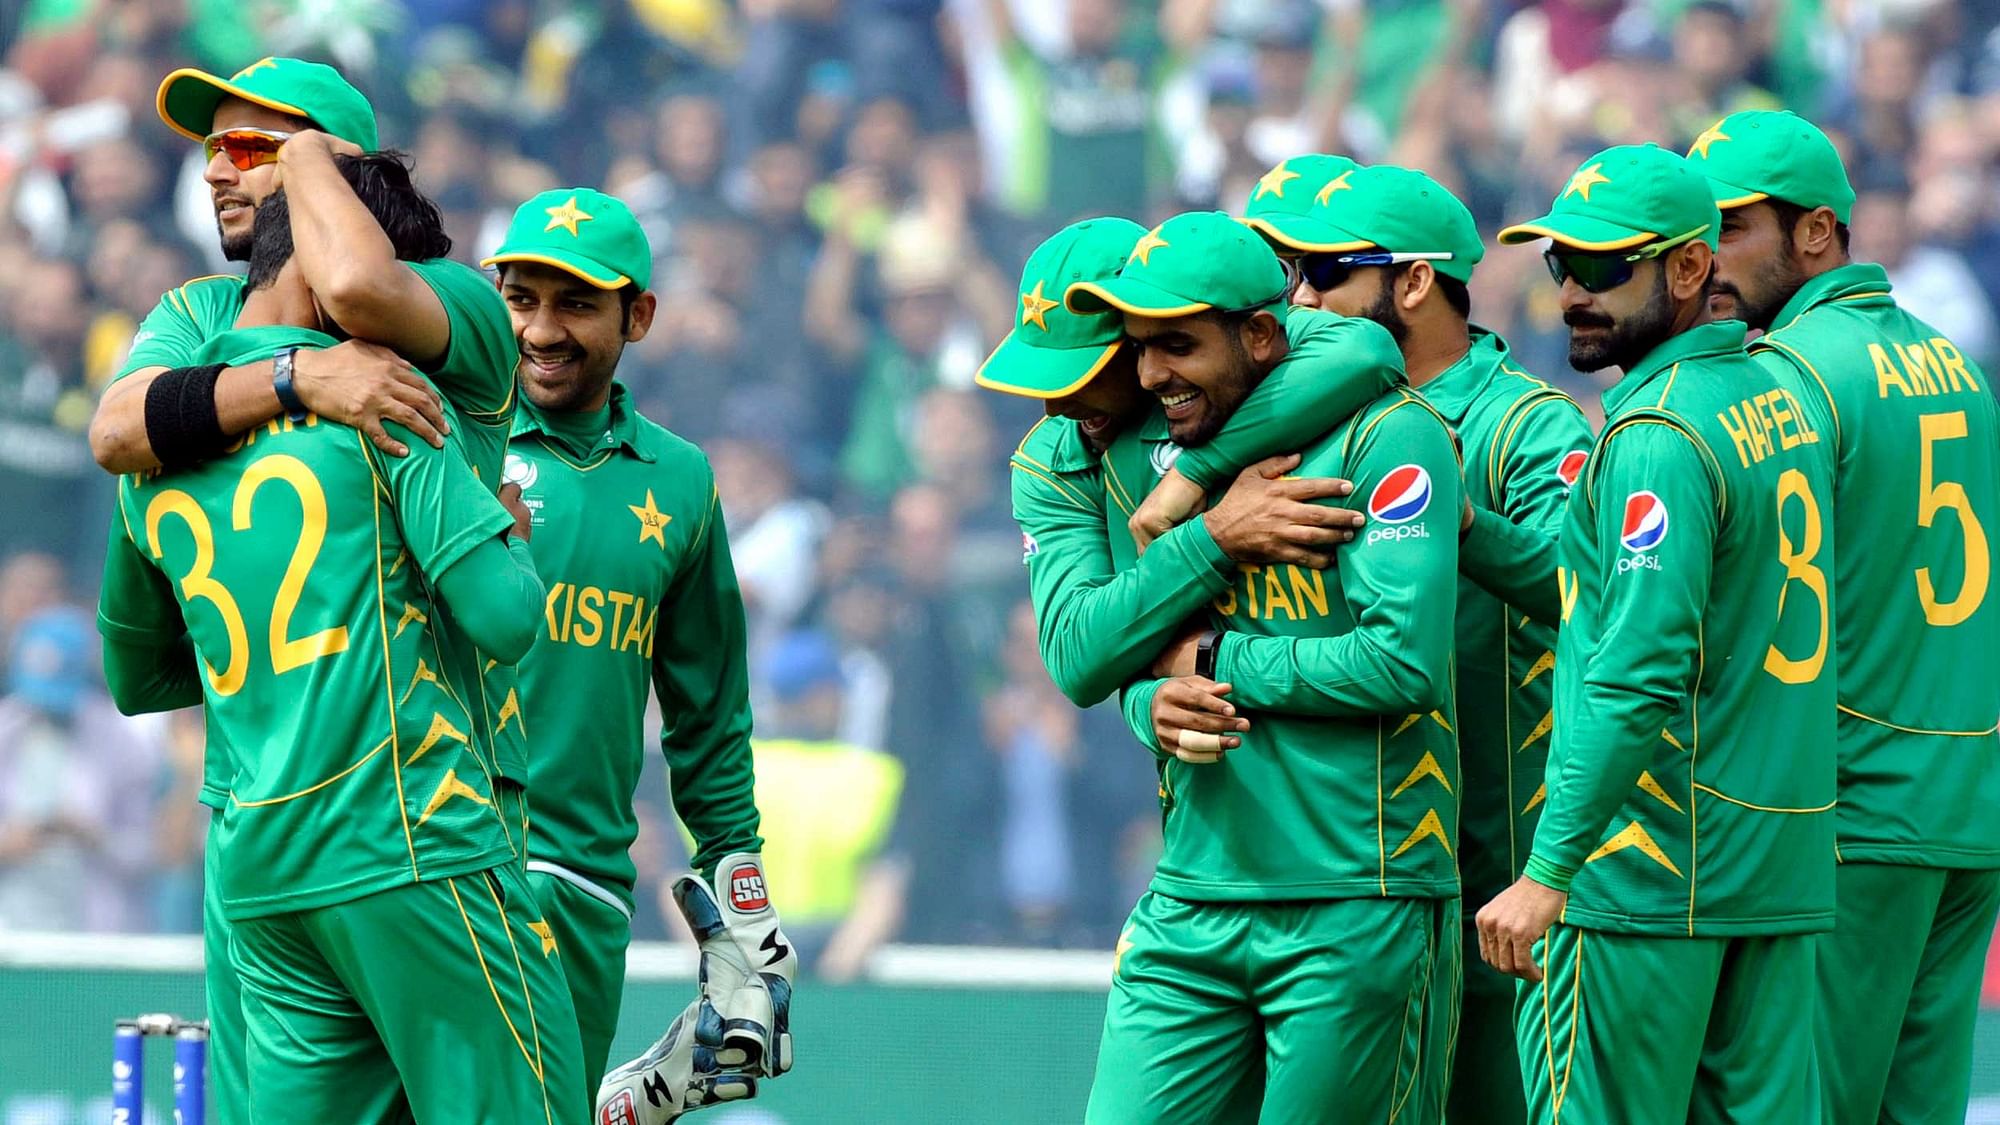 Pakistan’s centrally contracted players, including Babar Azam, Sarfaraz Ahmed and Shaheen Afridi will undergo fitness tests on 6 and 7 January, the country’s cricket board (PCB) said on Friday.